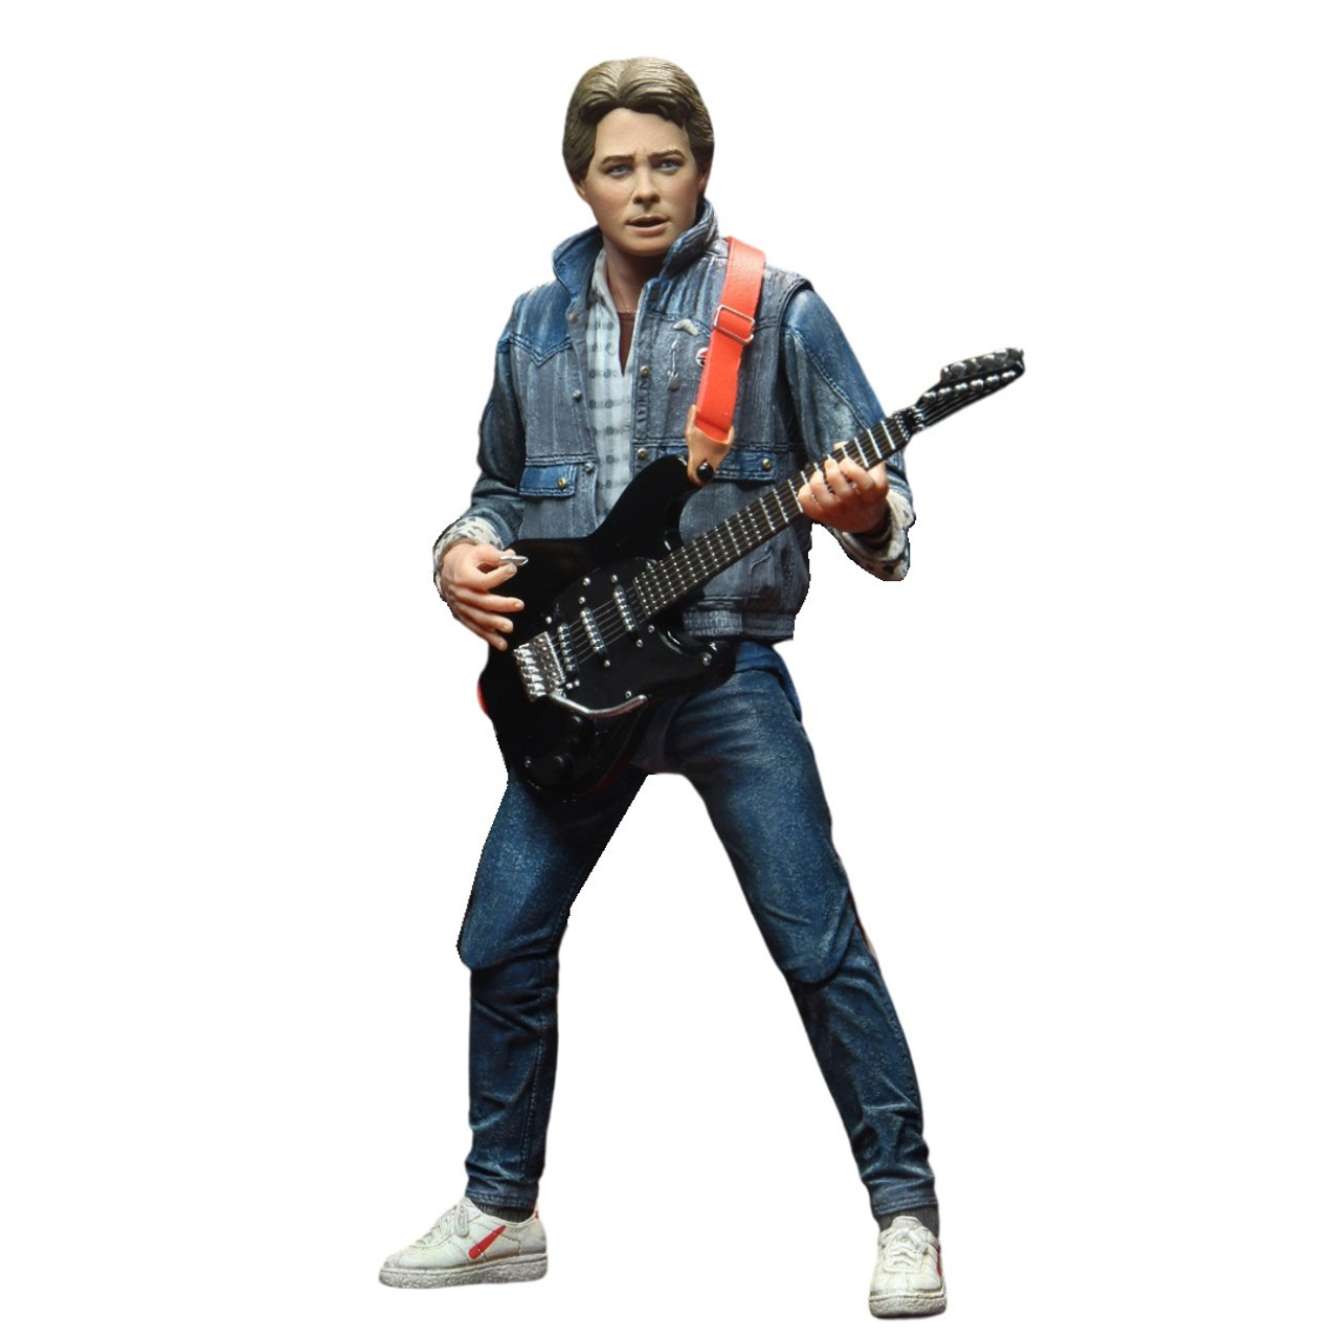 Marty McFly (Back to the Future) 1985 Audition NECA Ultimate 7" Action Figure